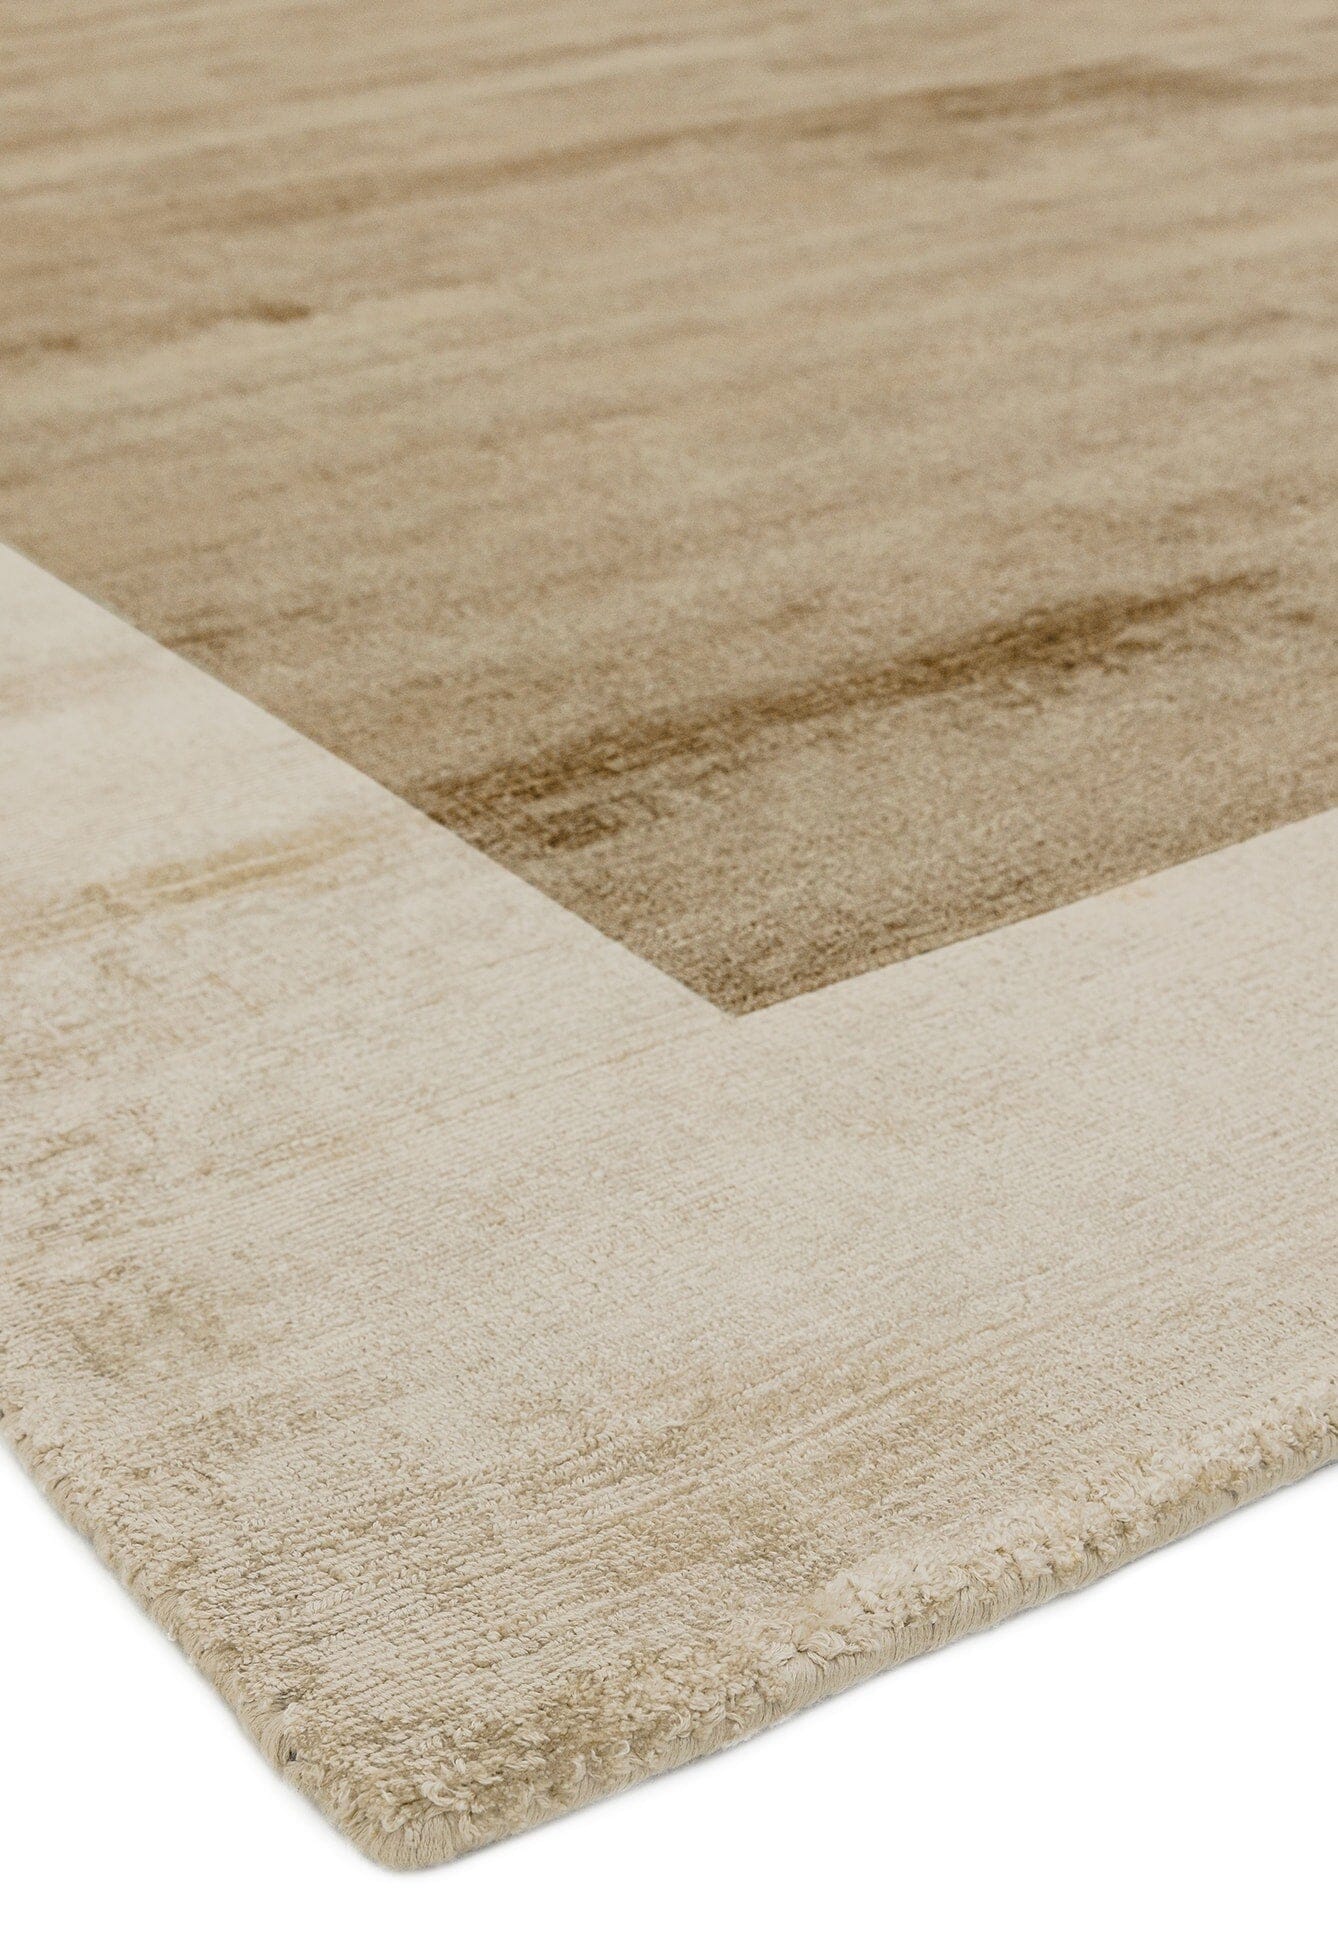  Asiatic Carpets-Asiatic Carpets Blade Hand Woven Rug Putty Champagne - 160 x 230cm-Beige, Natural 317 